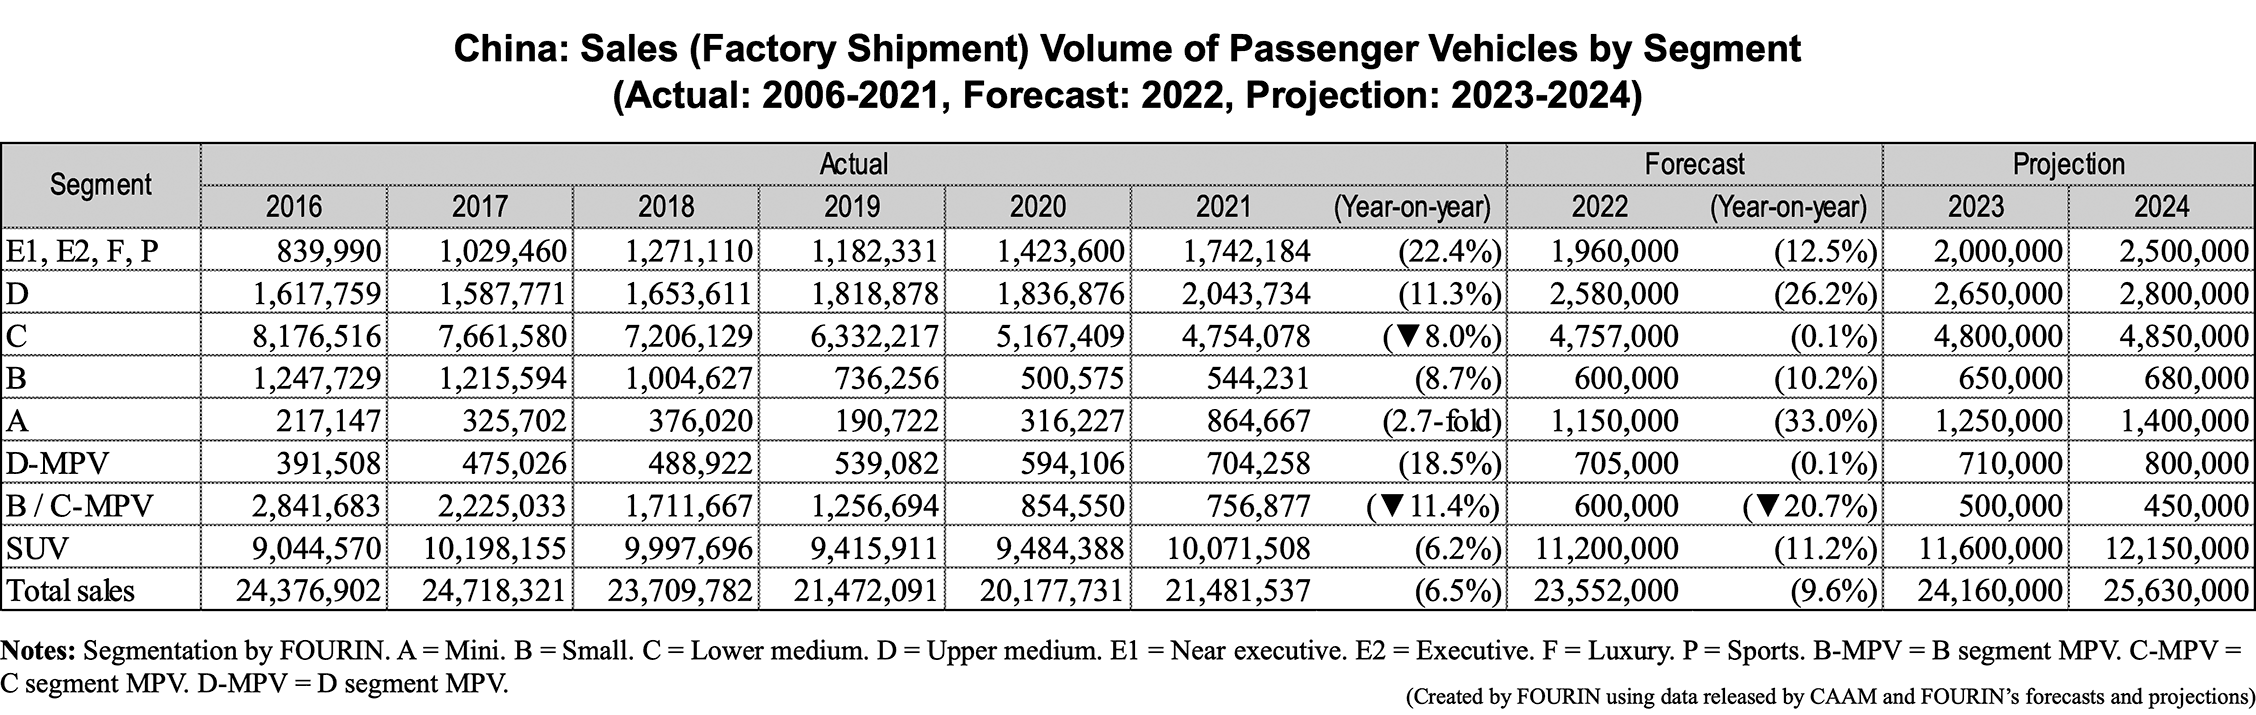 Data table: China: Sales (Factory Shipment) Volume of Passenger Vehicles by Segment (Actual: 2006-2021, Forecast: 2022, Projection: 2023-2024)